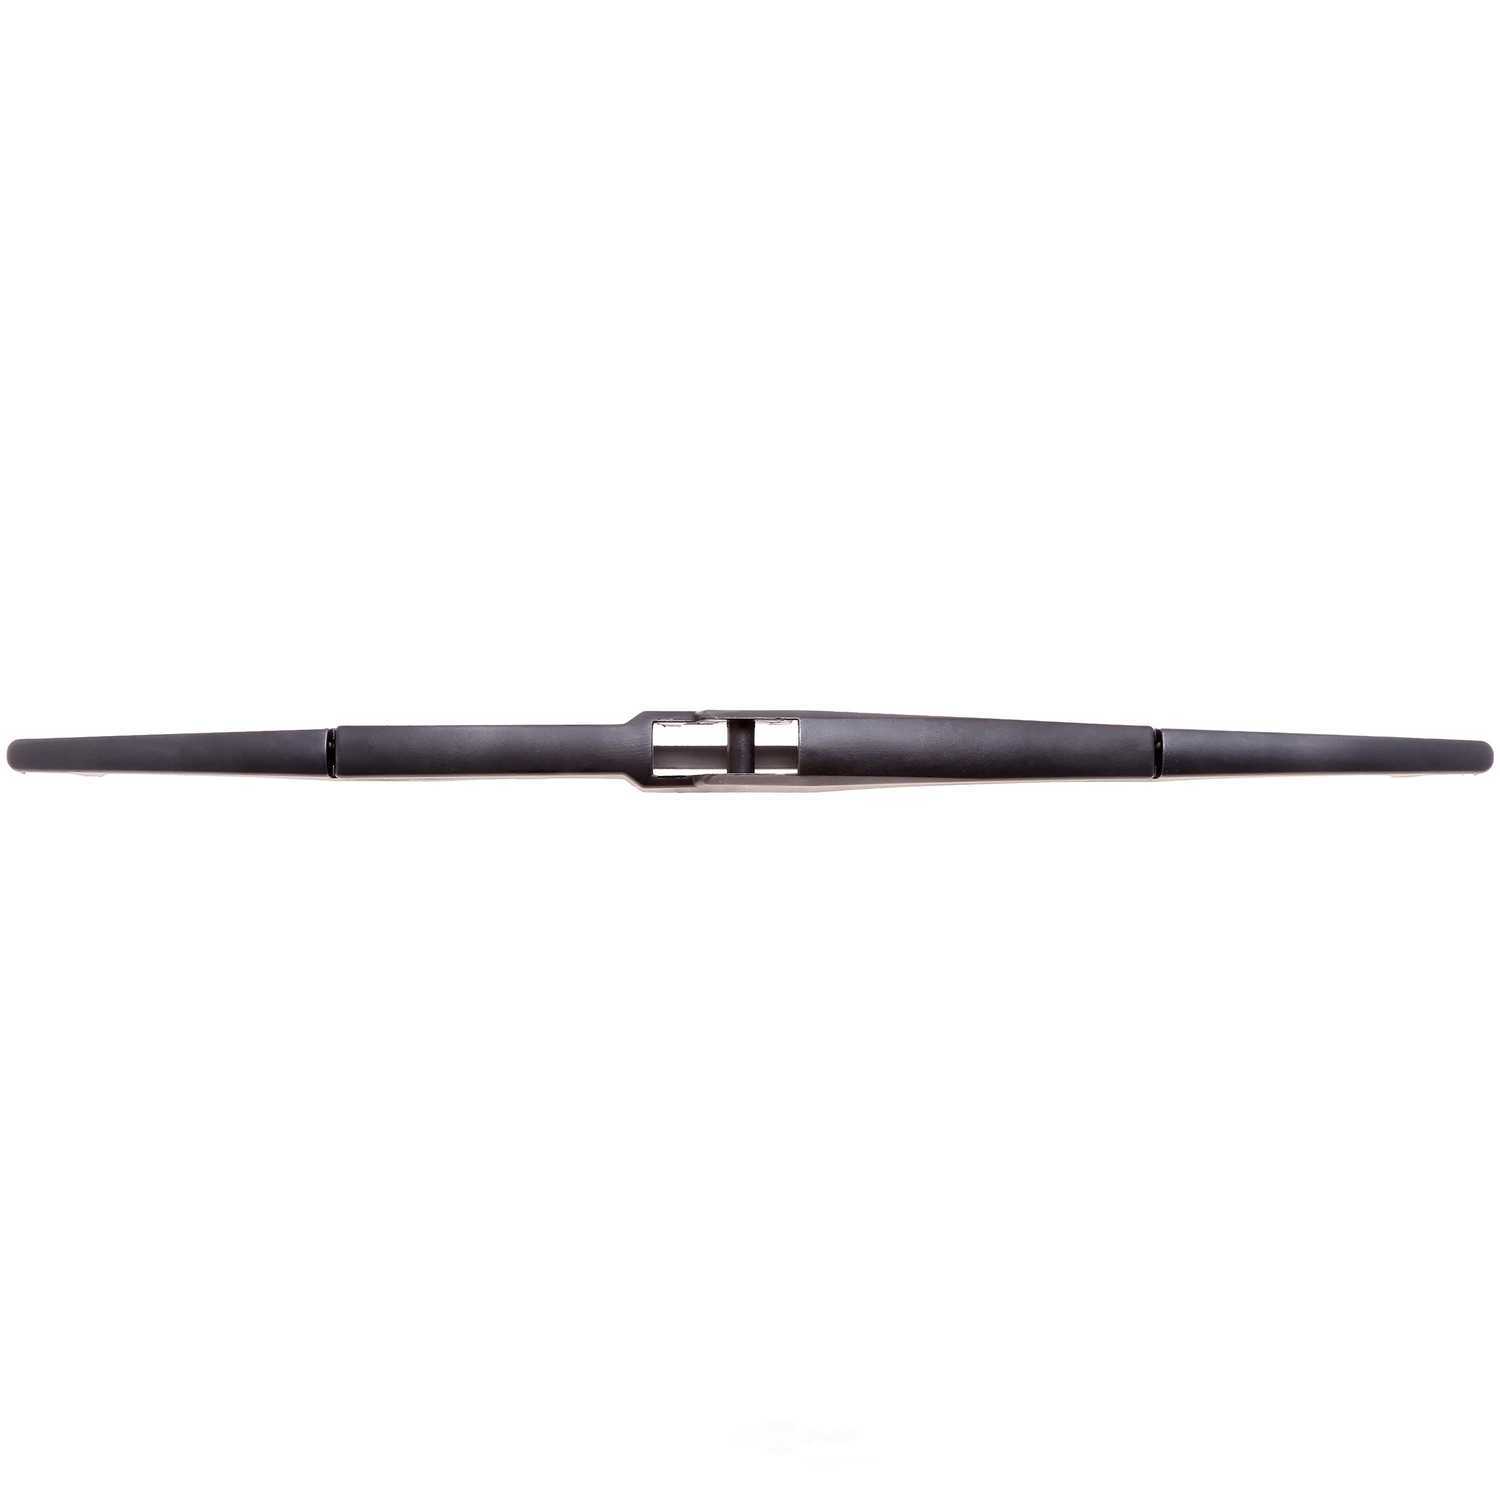 ACDELCO GOLD/PROFESSIONAL - Performance Windshield Wiper Blade (Rear) - DCC 8-214A